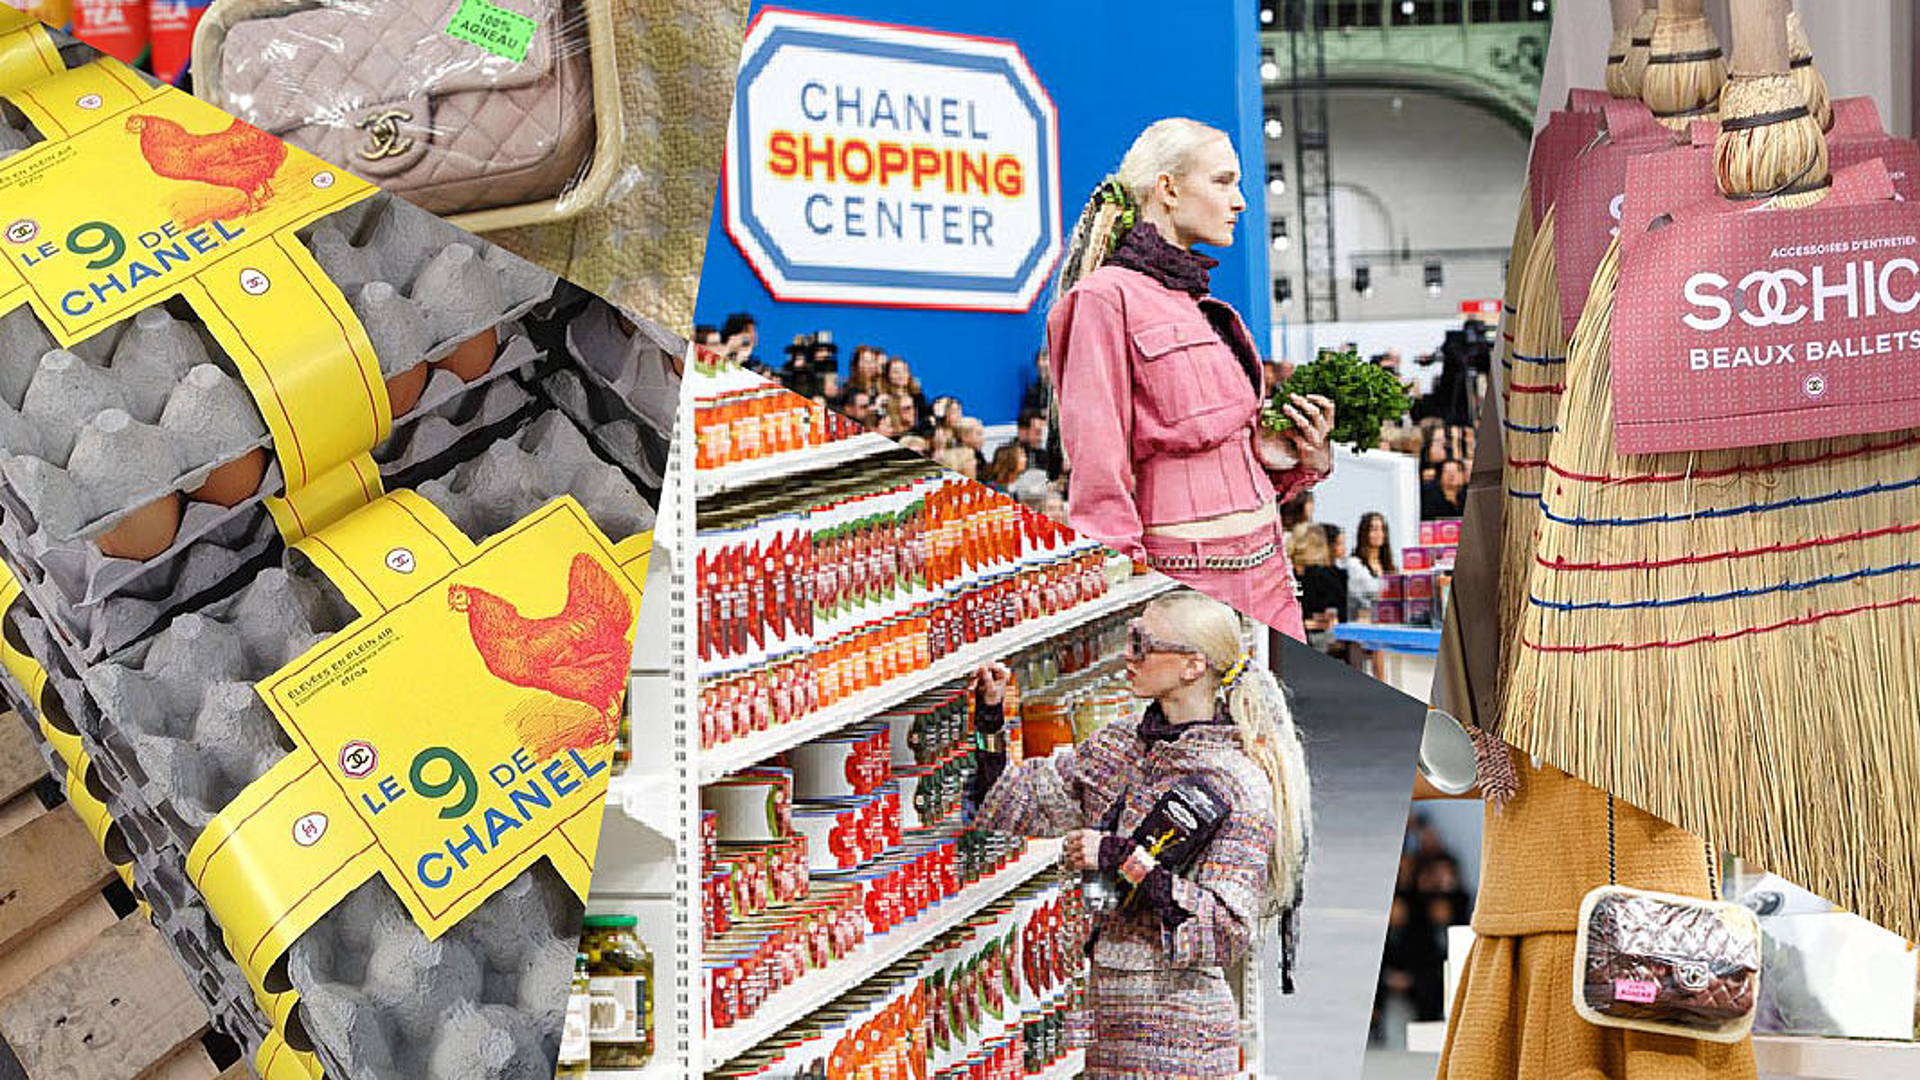 Packaging Chanel Style: Chanel Shopping Center at Paris Fashion Week Fall  2014 | Dieline - Design, Branding & Packaging Inspiration